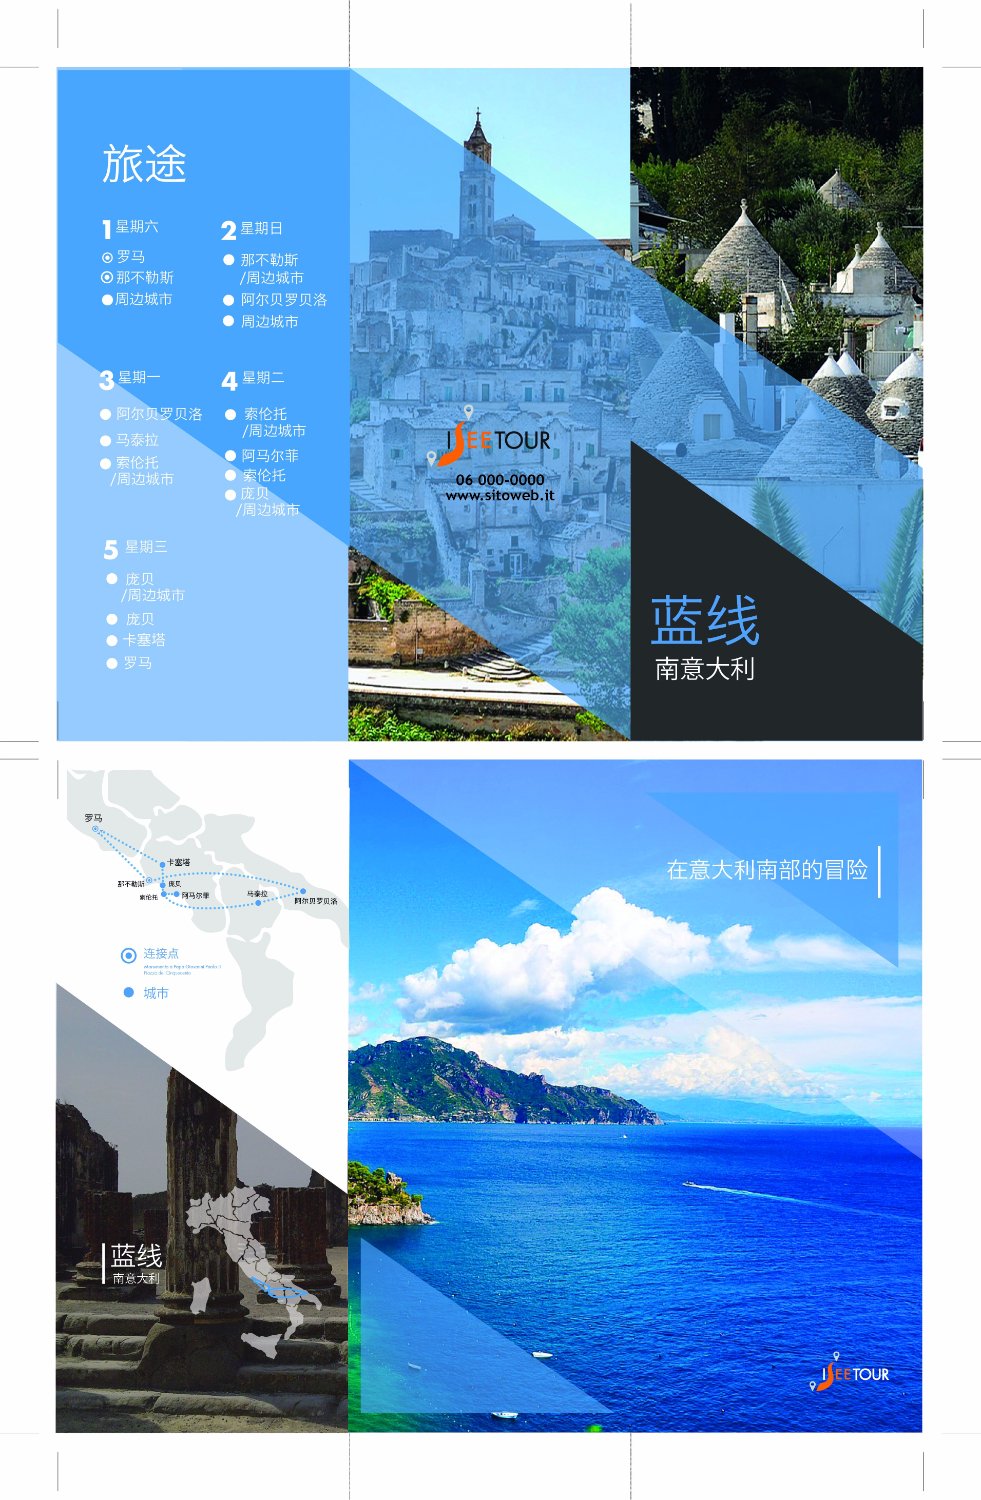 Jia Ri Tour Operator by See View Tour s.r.l.